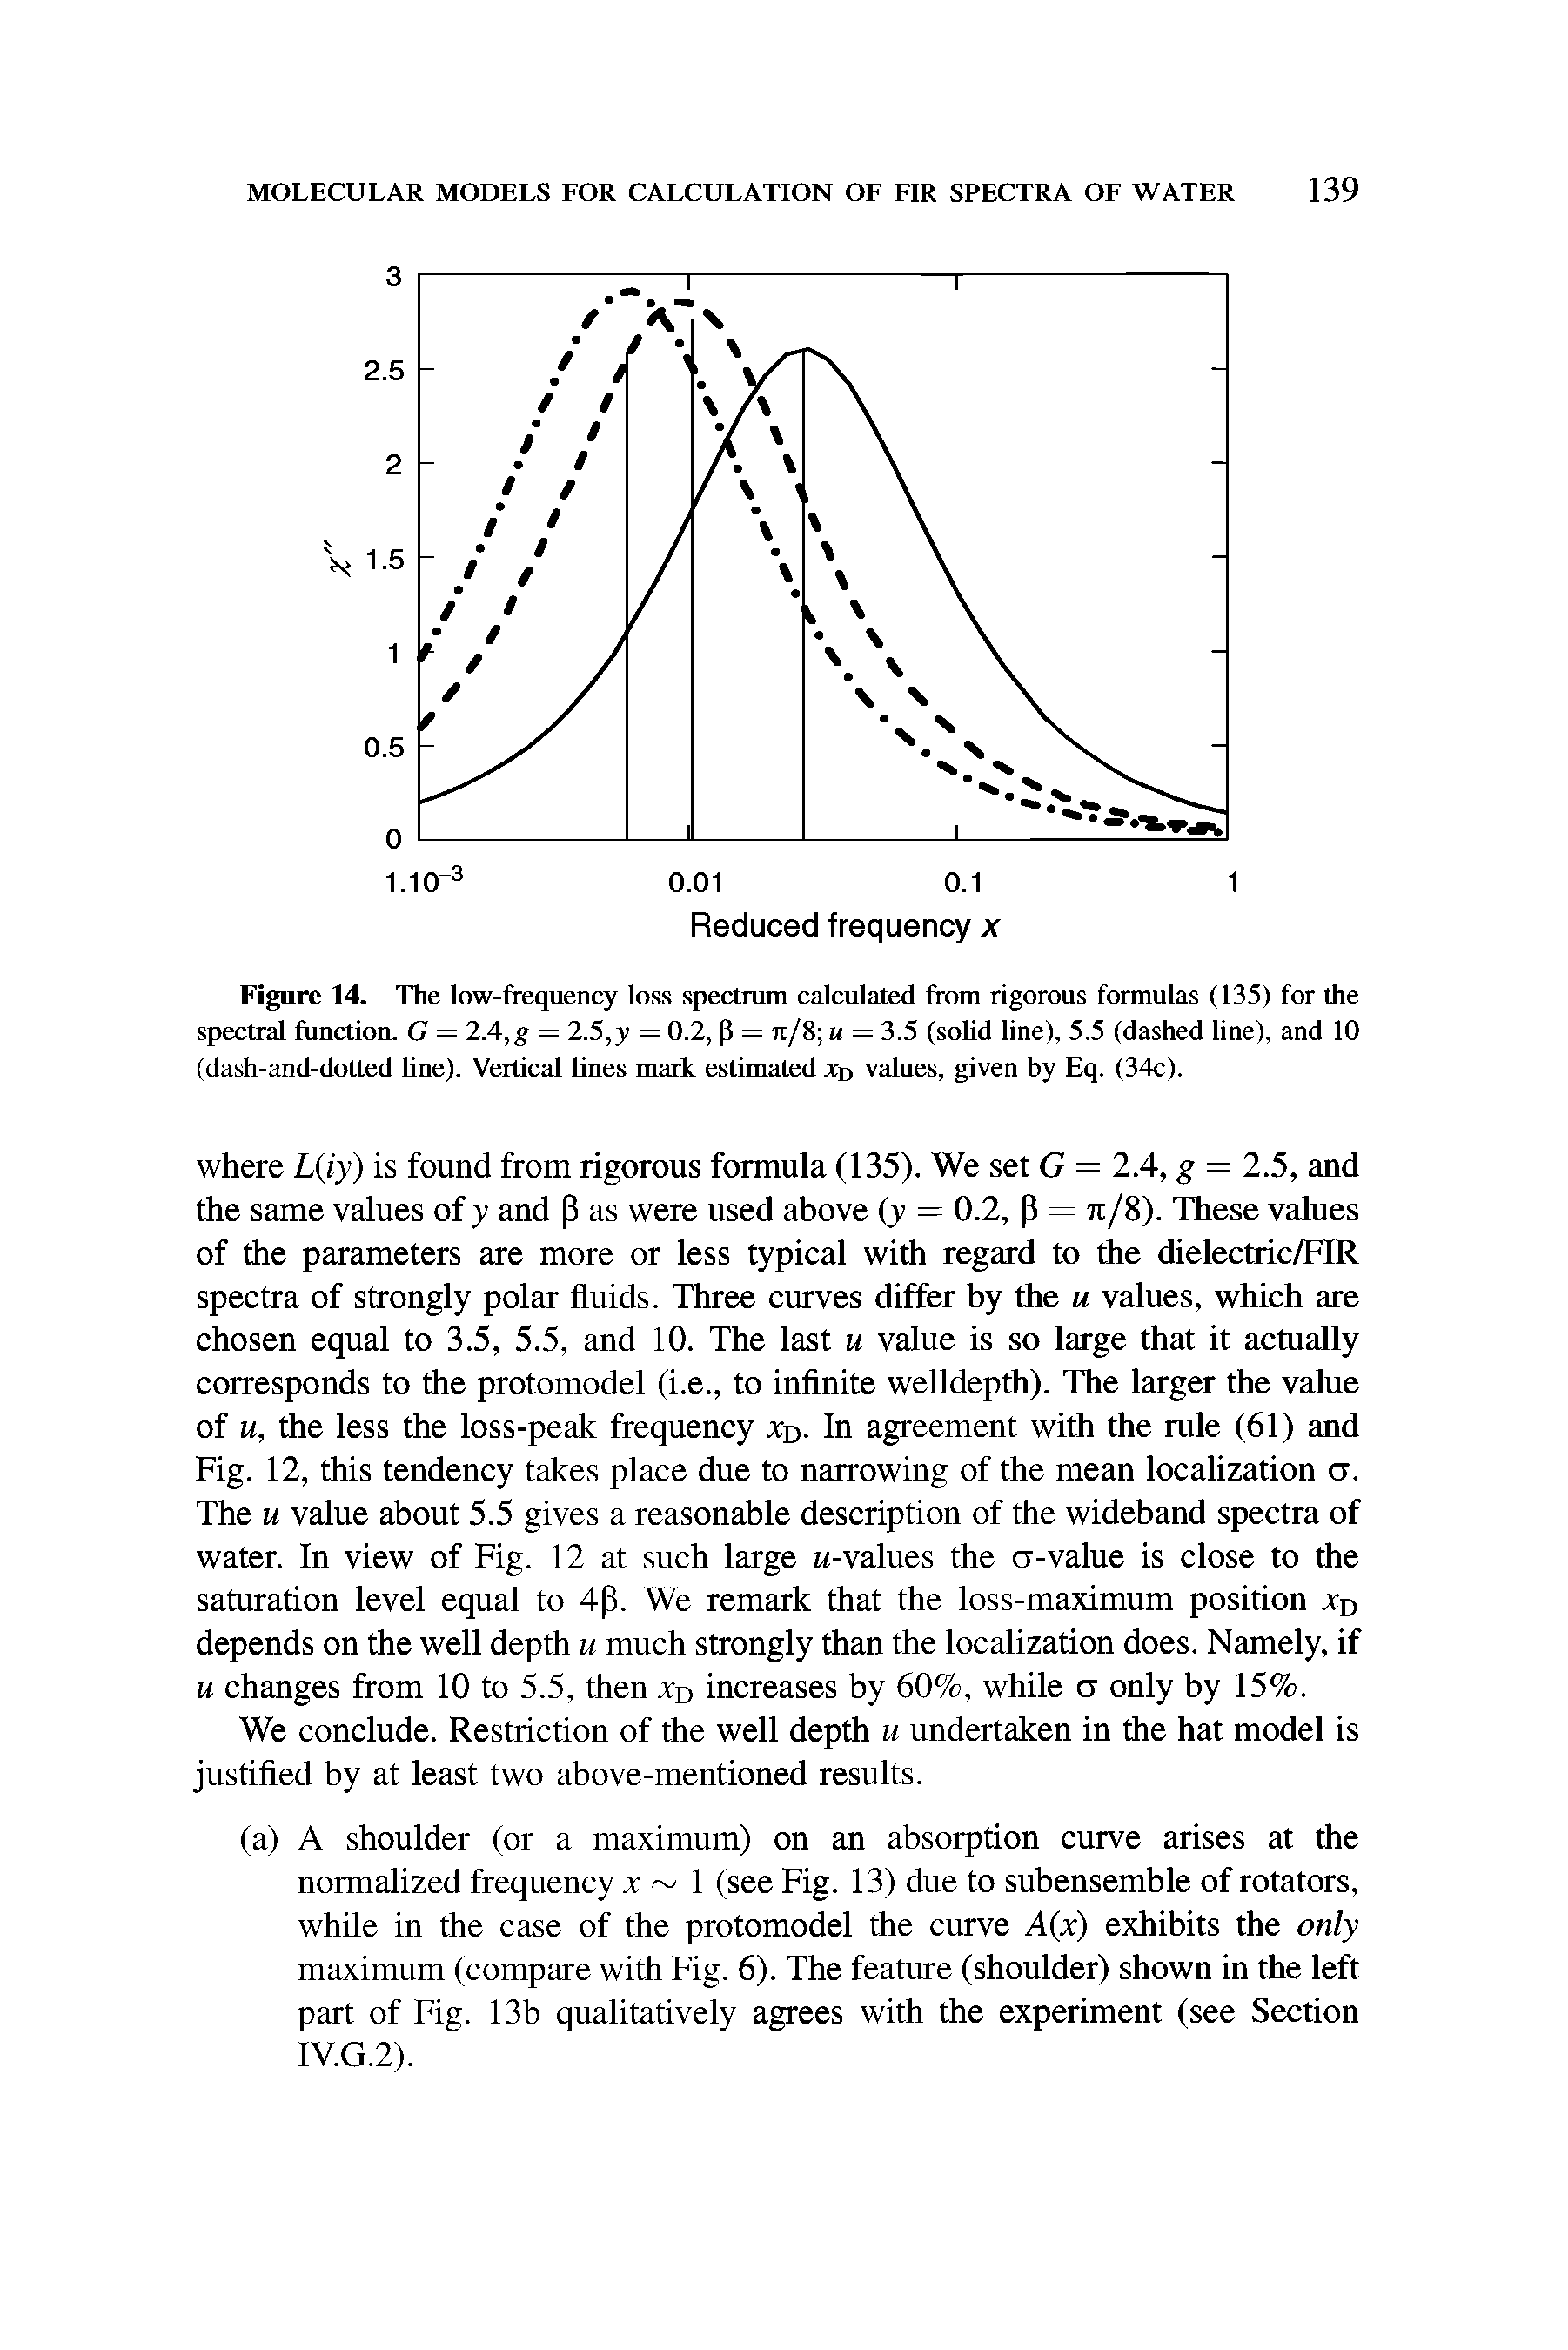 Figure 14. The low-frequency loss spectrum calculated from rigorous formulas (135) for the spectral function. G = 2.4,g — 2.5,y — 0.2, P — it/8 u — 3.5 (solid line), 5.5 (dashed line), and 10 (dash-and-dotted line). Vertical lines mark estimated V, values, given by Eq. (34c).